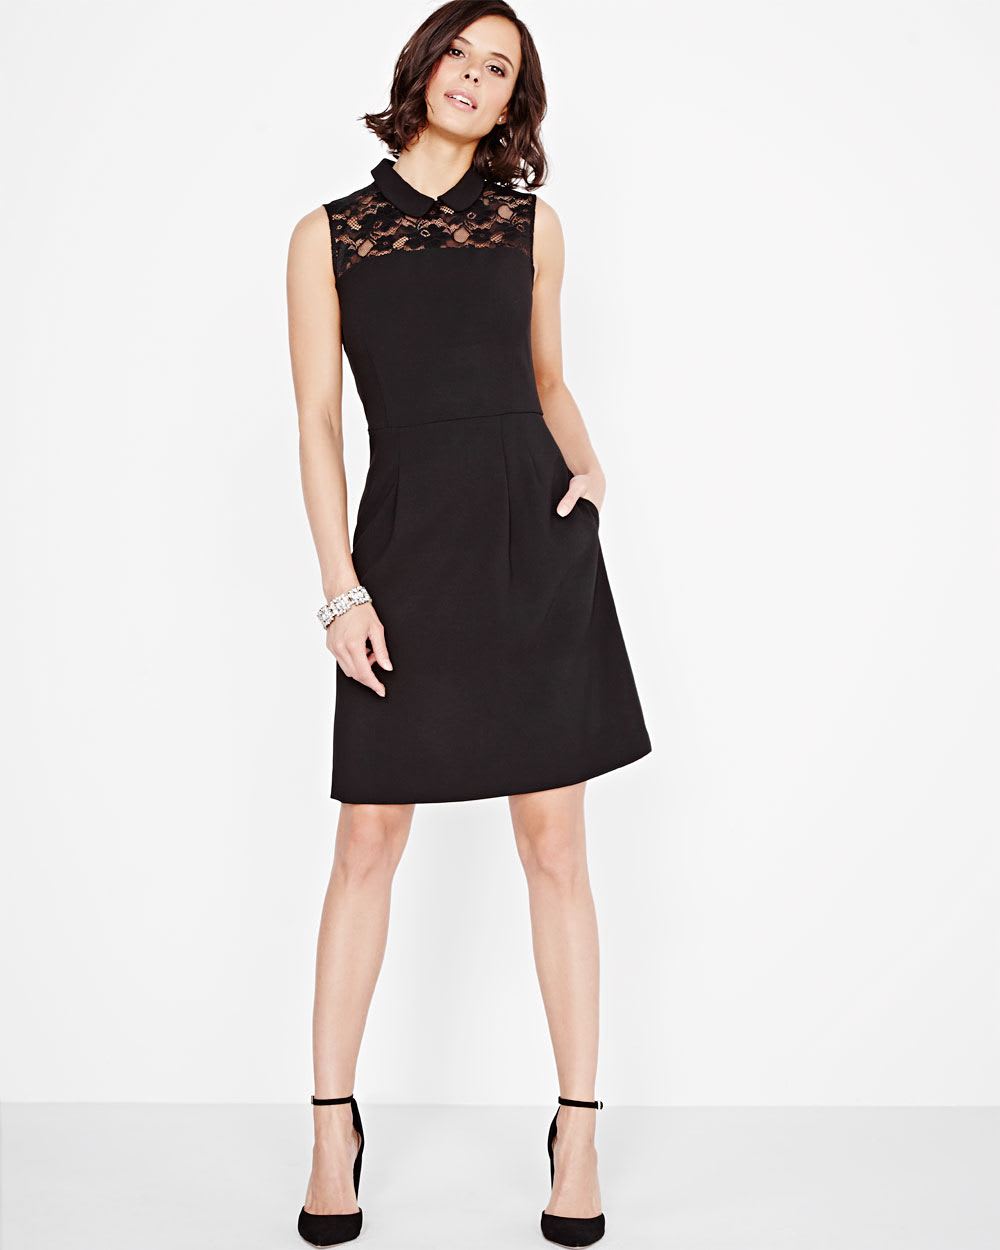 Fit and Flare Dress with lace yoke | RW&CO.